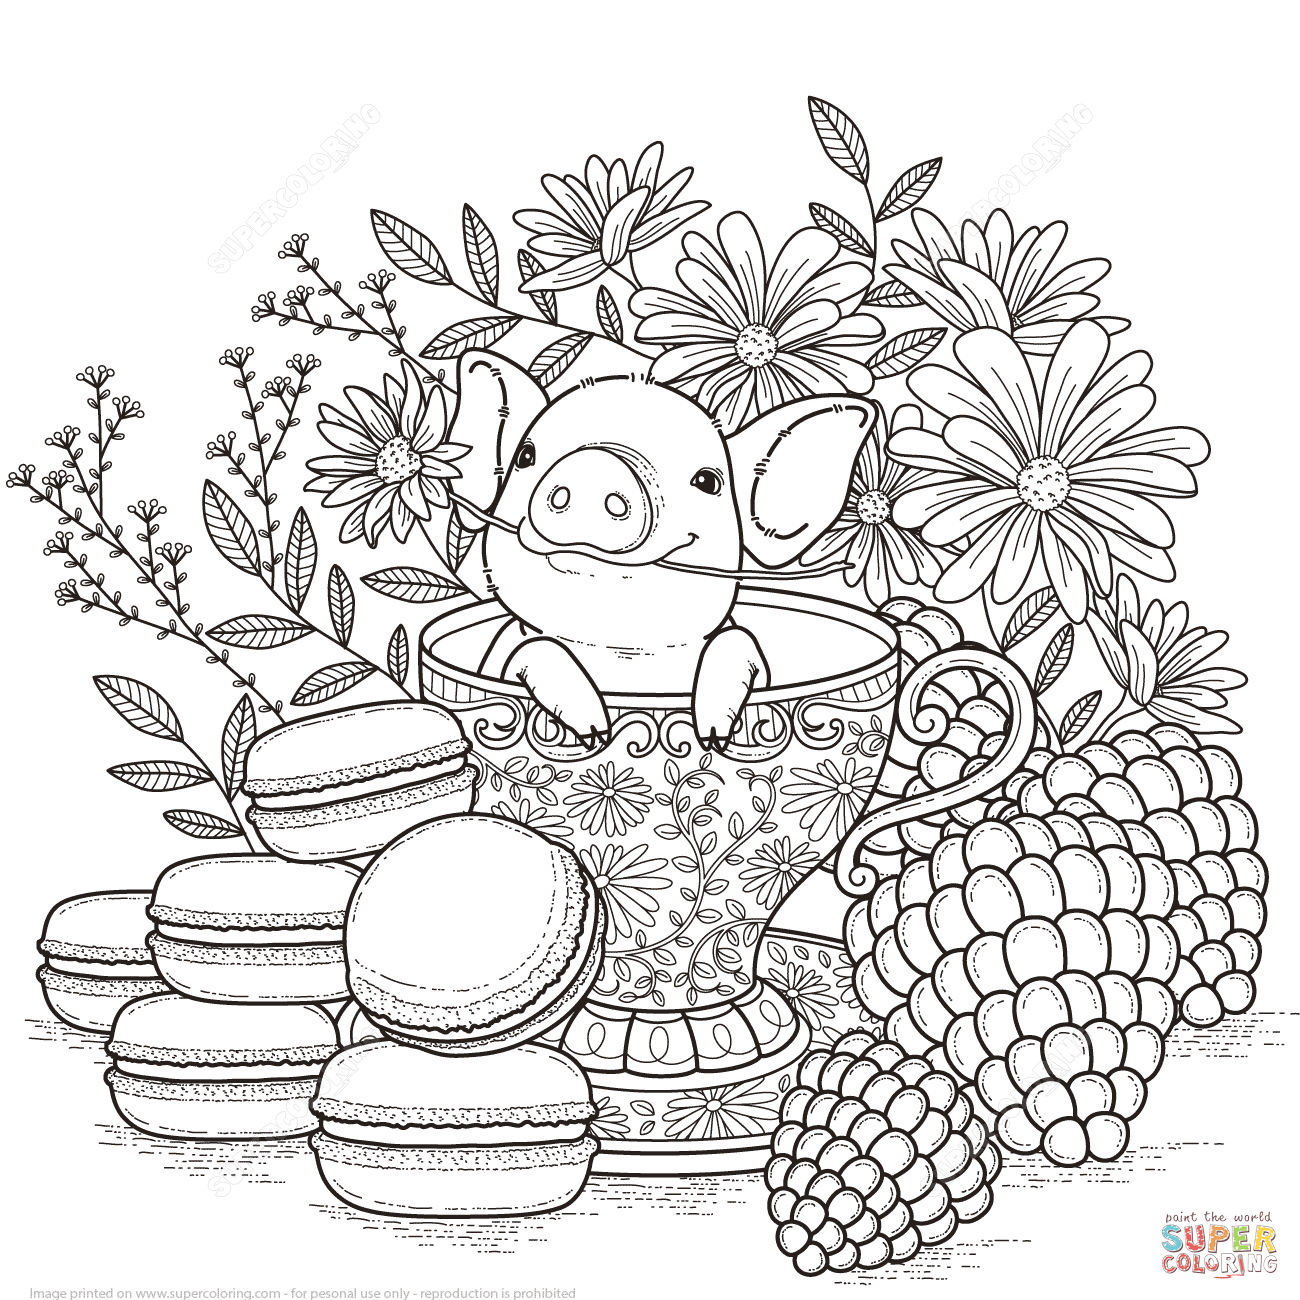 Adorable Little Pig coloring page | Free Printable Coloring Pages